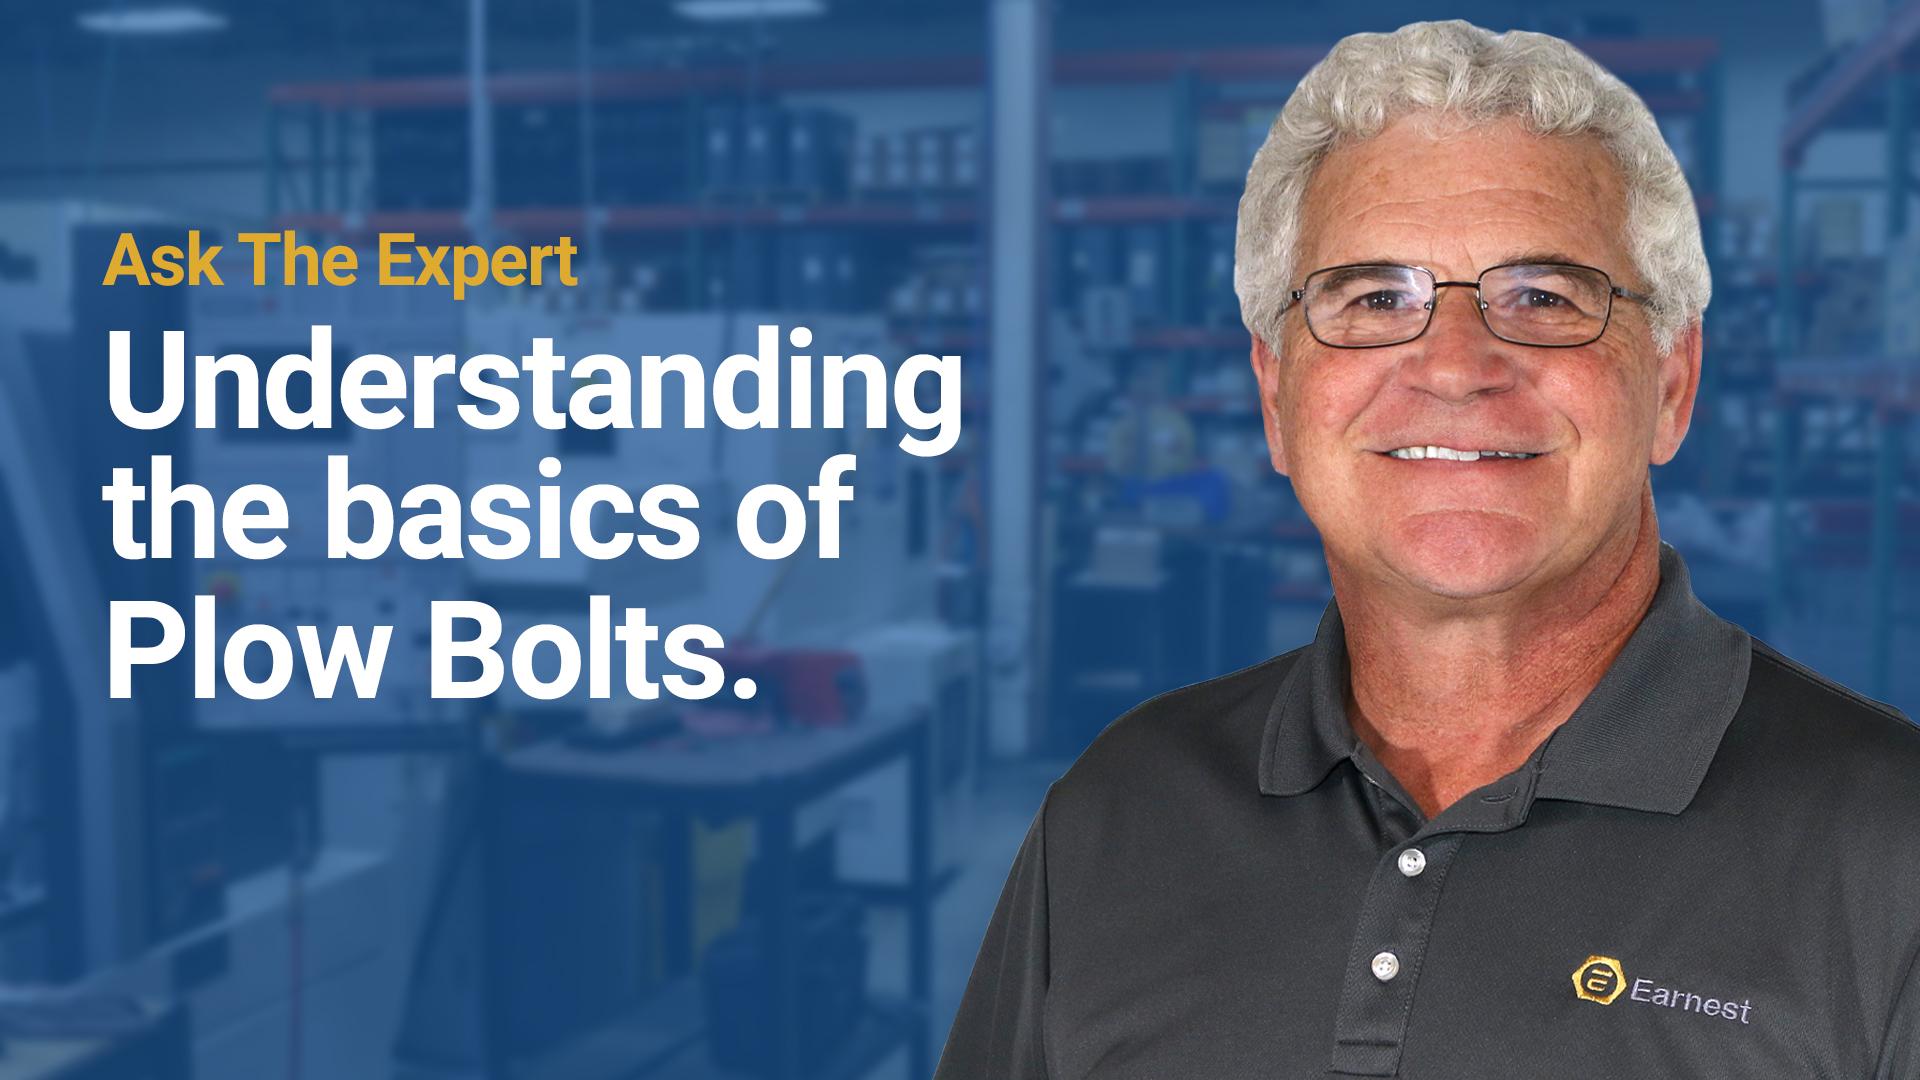 Ask The Expert: Understanding the basics of Plow Bolts